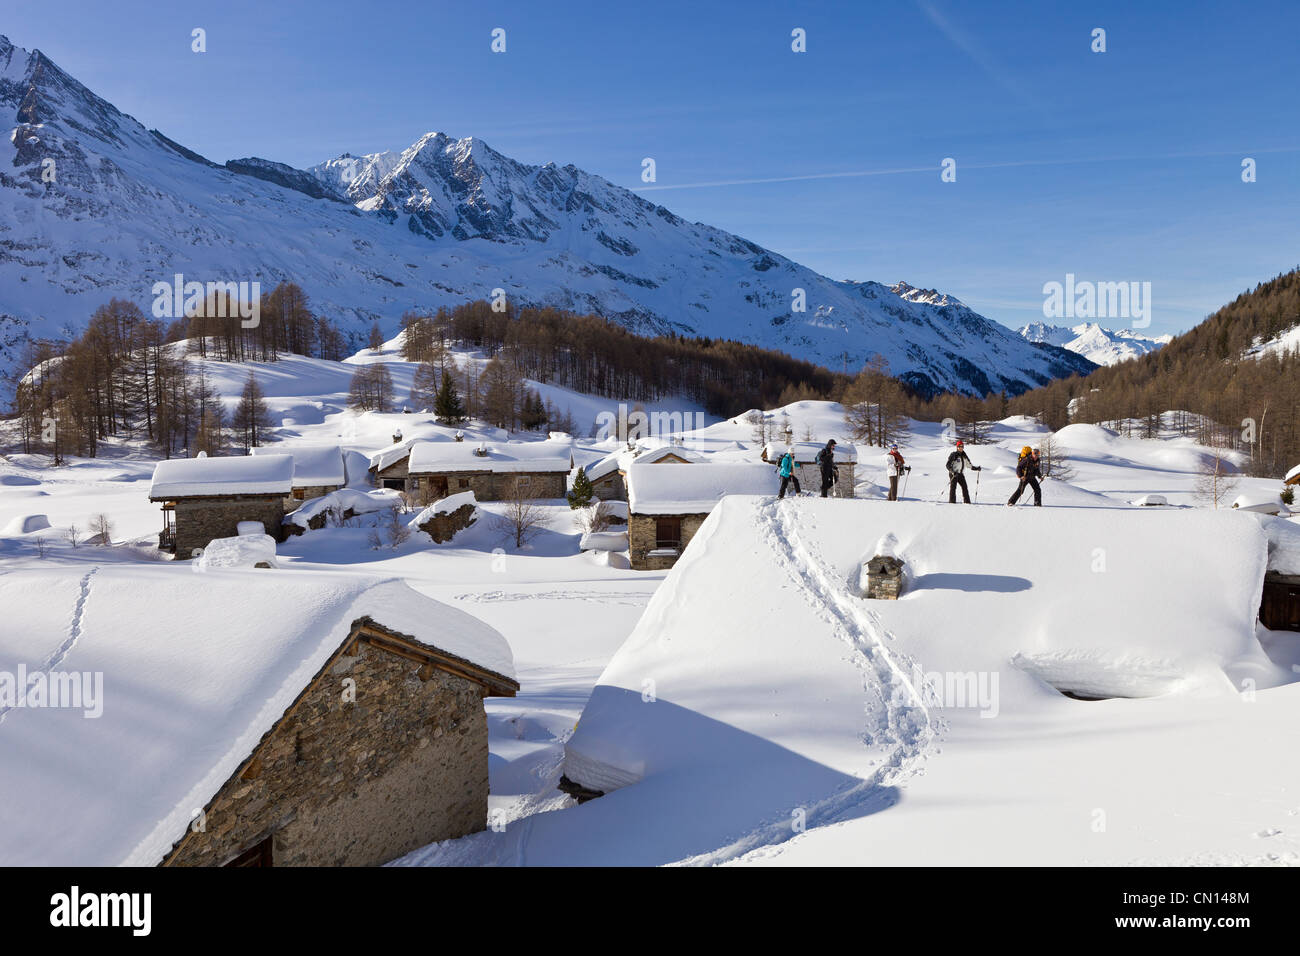 France, Savoie, Sainte Foy Tarentaise, gone hiking in rackets in the hamlet of high mountain pasture Le Monal Stock Photo